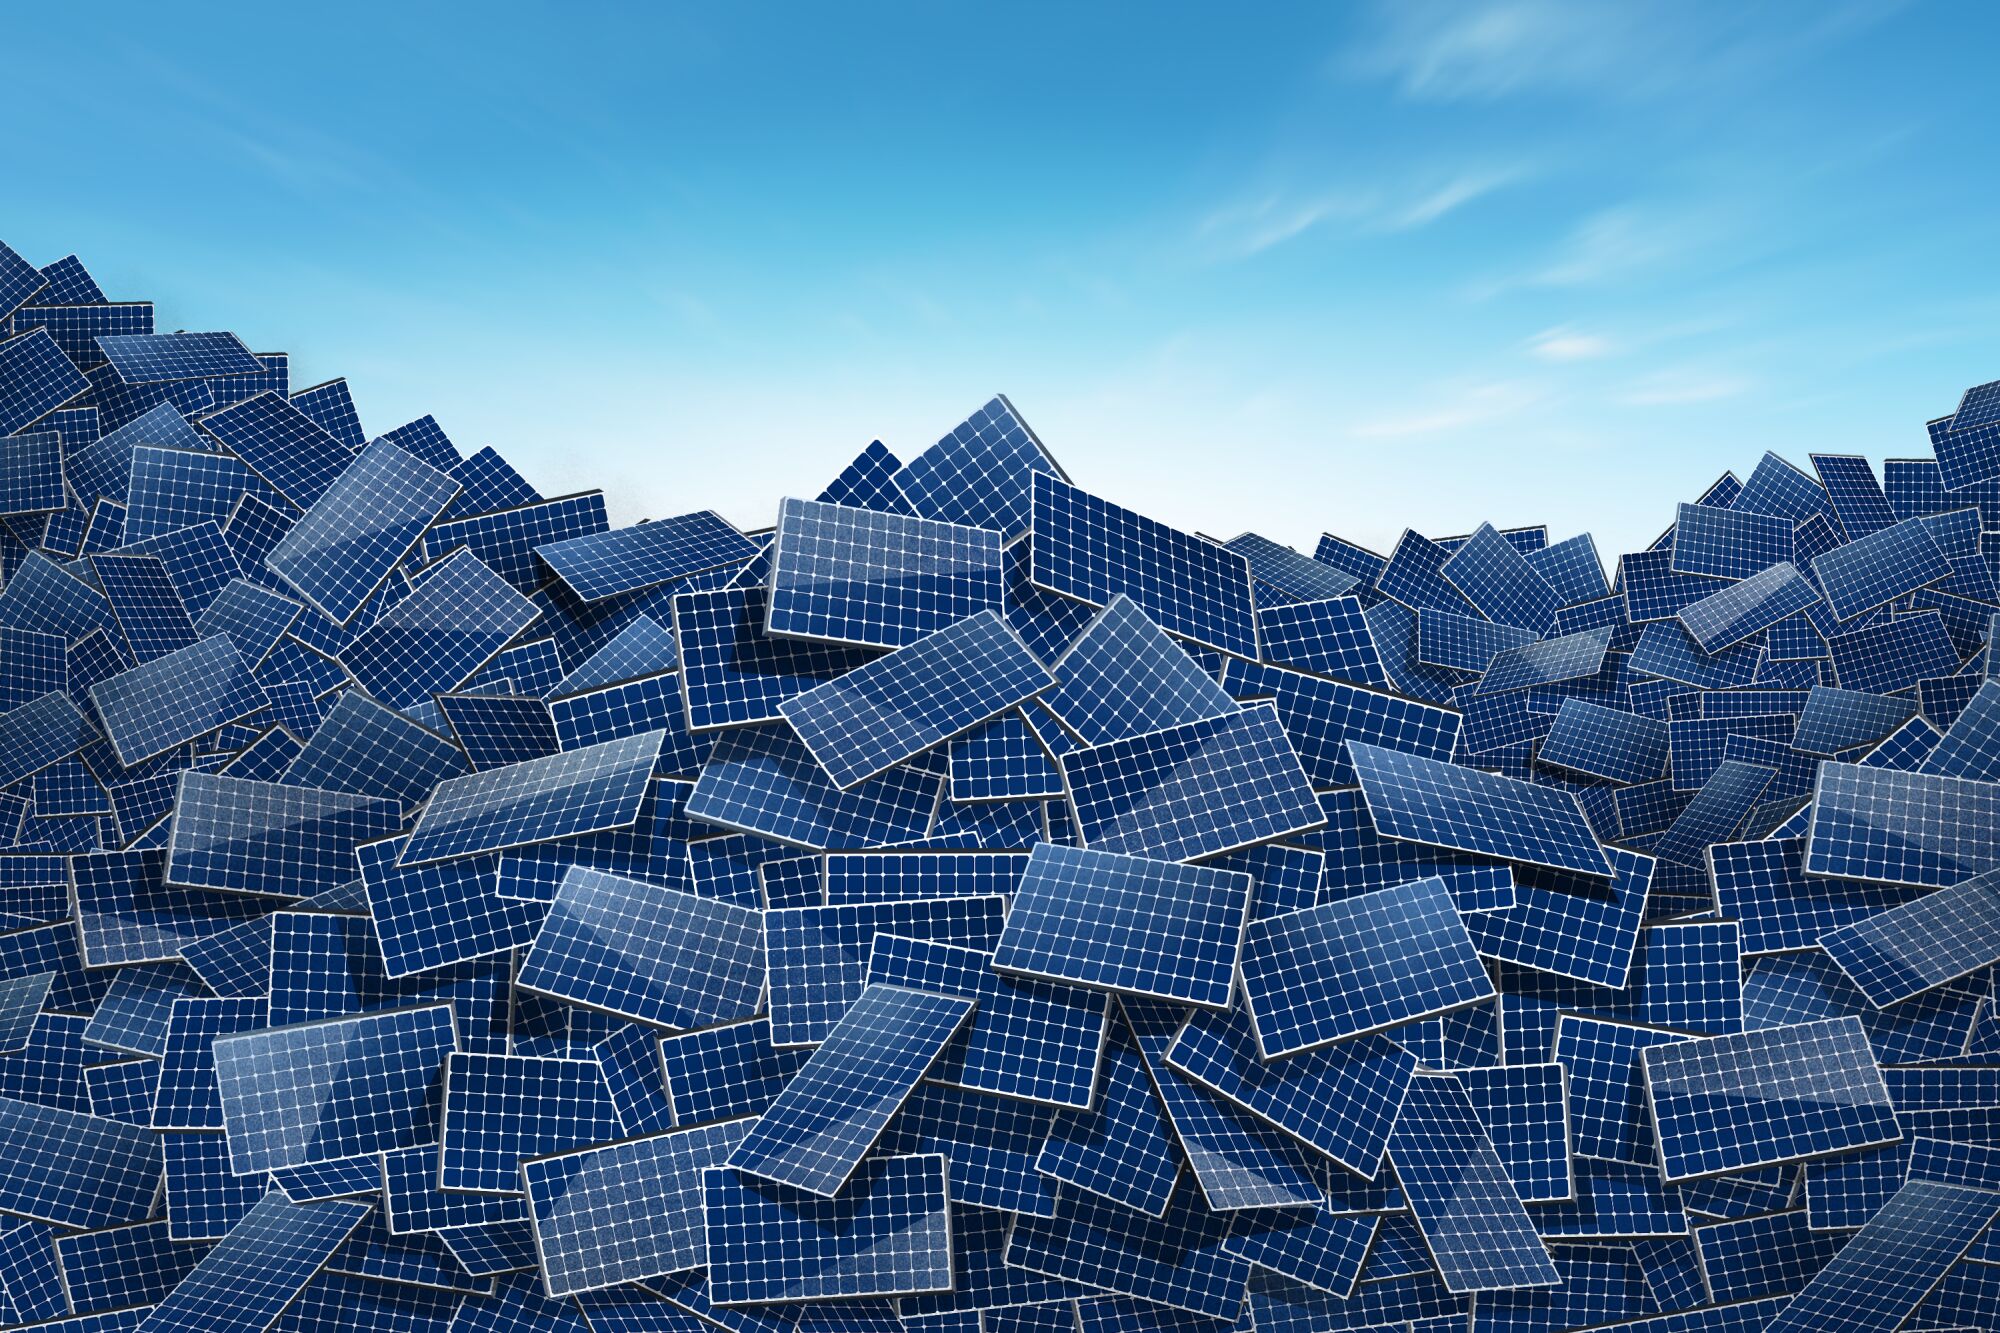 An illustration shows a pile of solar panels with a blue sky in the background.